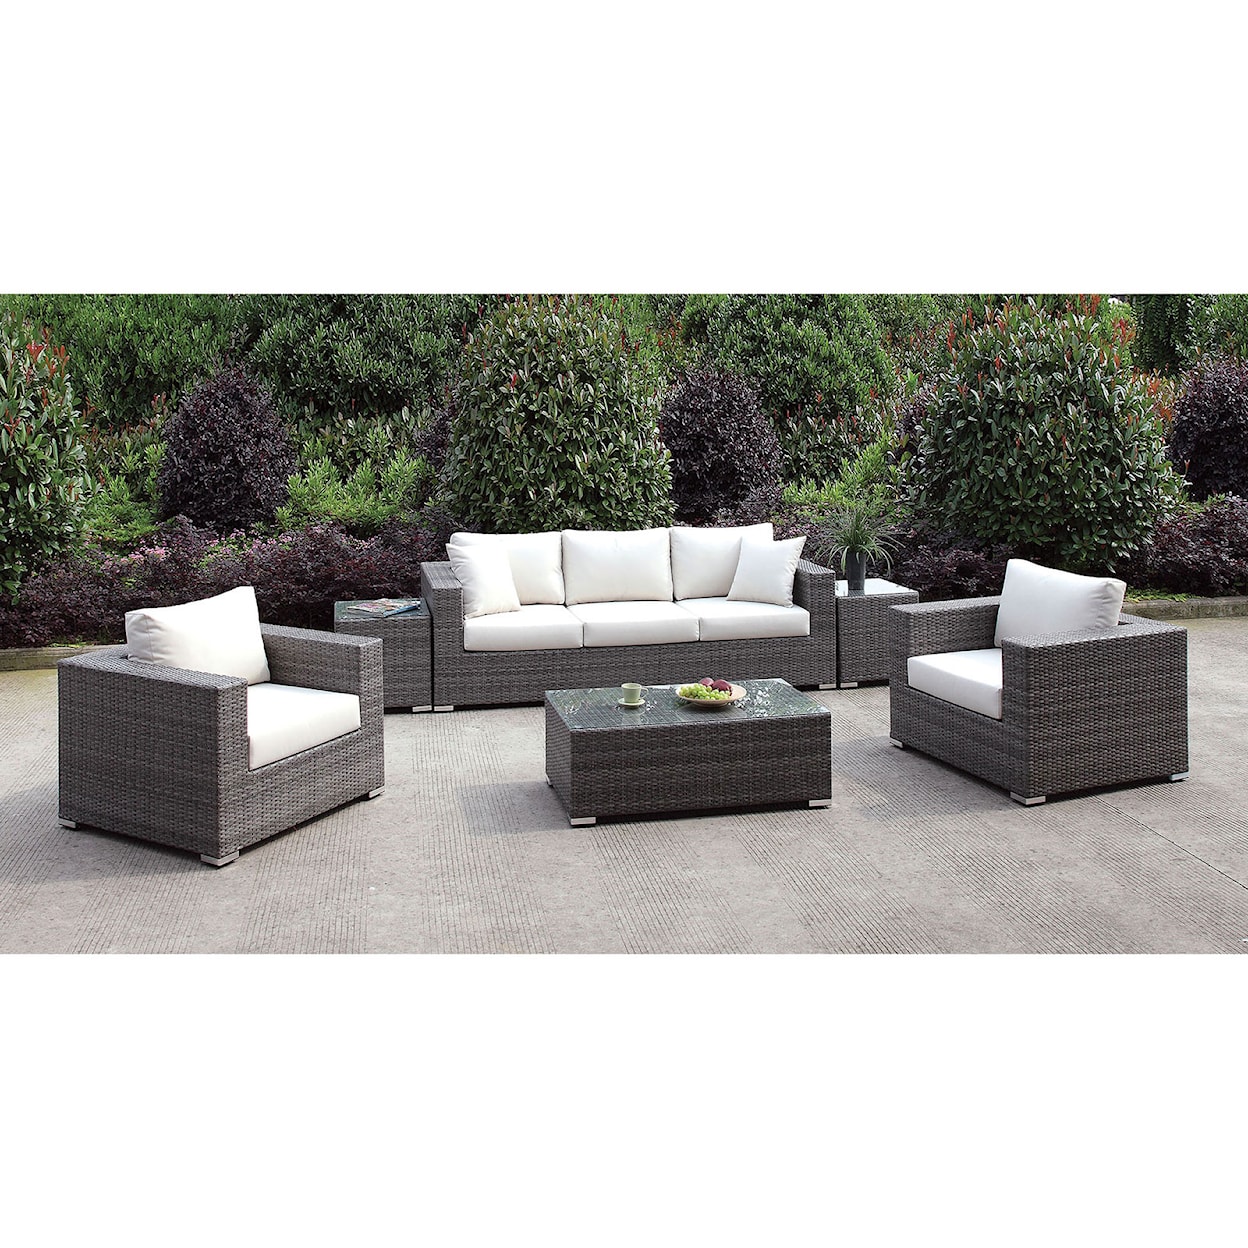 Furniture of America Somani Sofa + 2 Chairs+ 2 Ends + Coffee Table